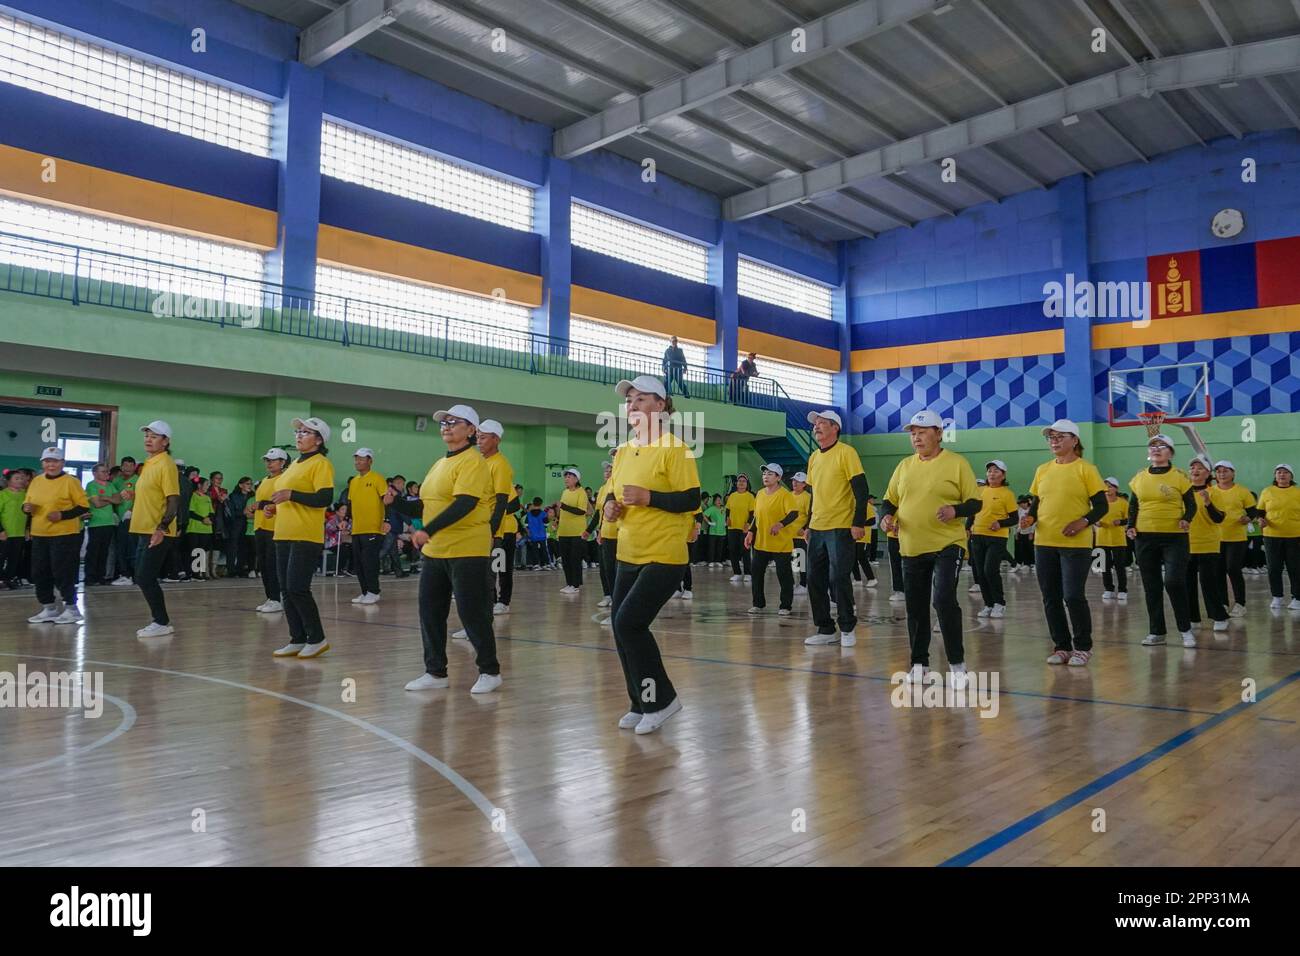 Adults dance at a gymnastics competition, which promotes physical and social activity among older adults, in Dalanzadgad, Umnugovi province, Mongolia, on Oct. 7, 2022. (Uranchimeg Tsoghuu/Global Press Journal) Stock Photo